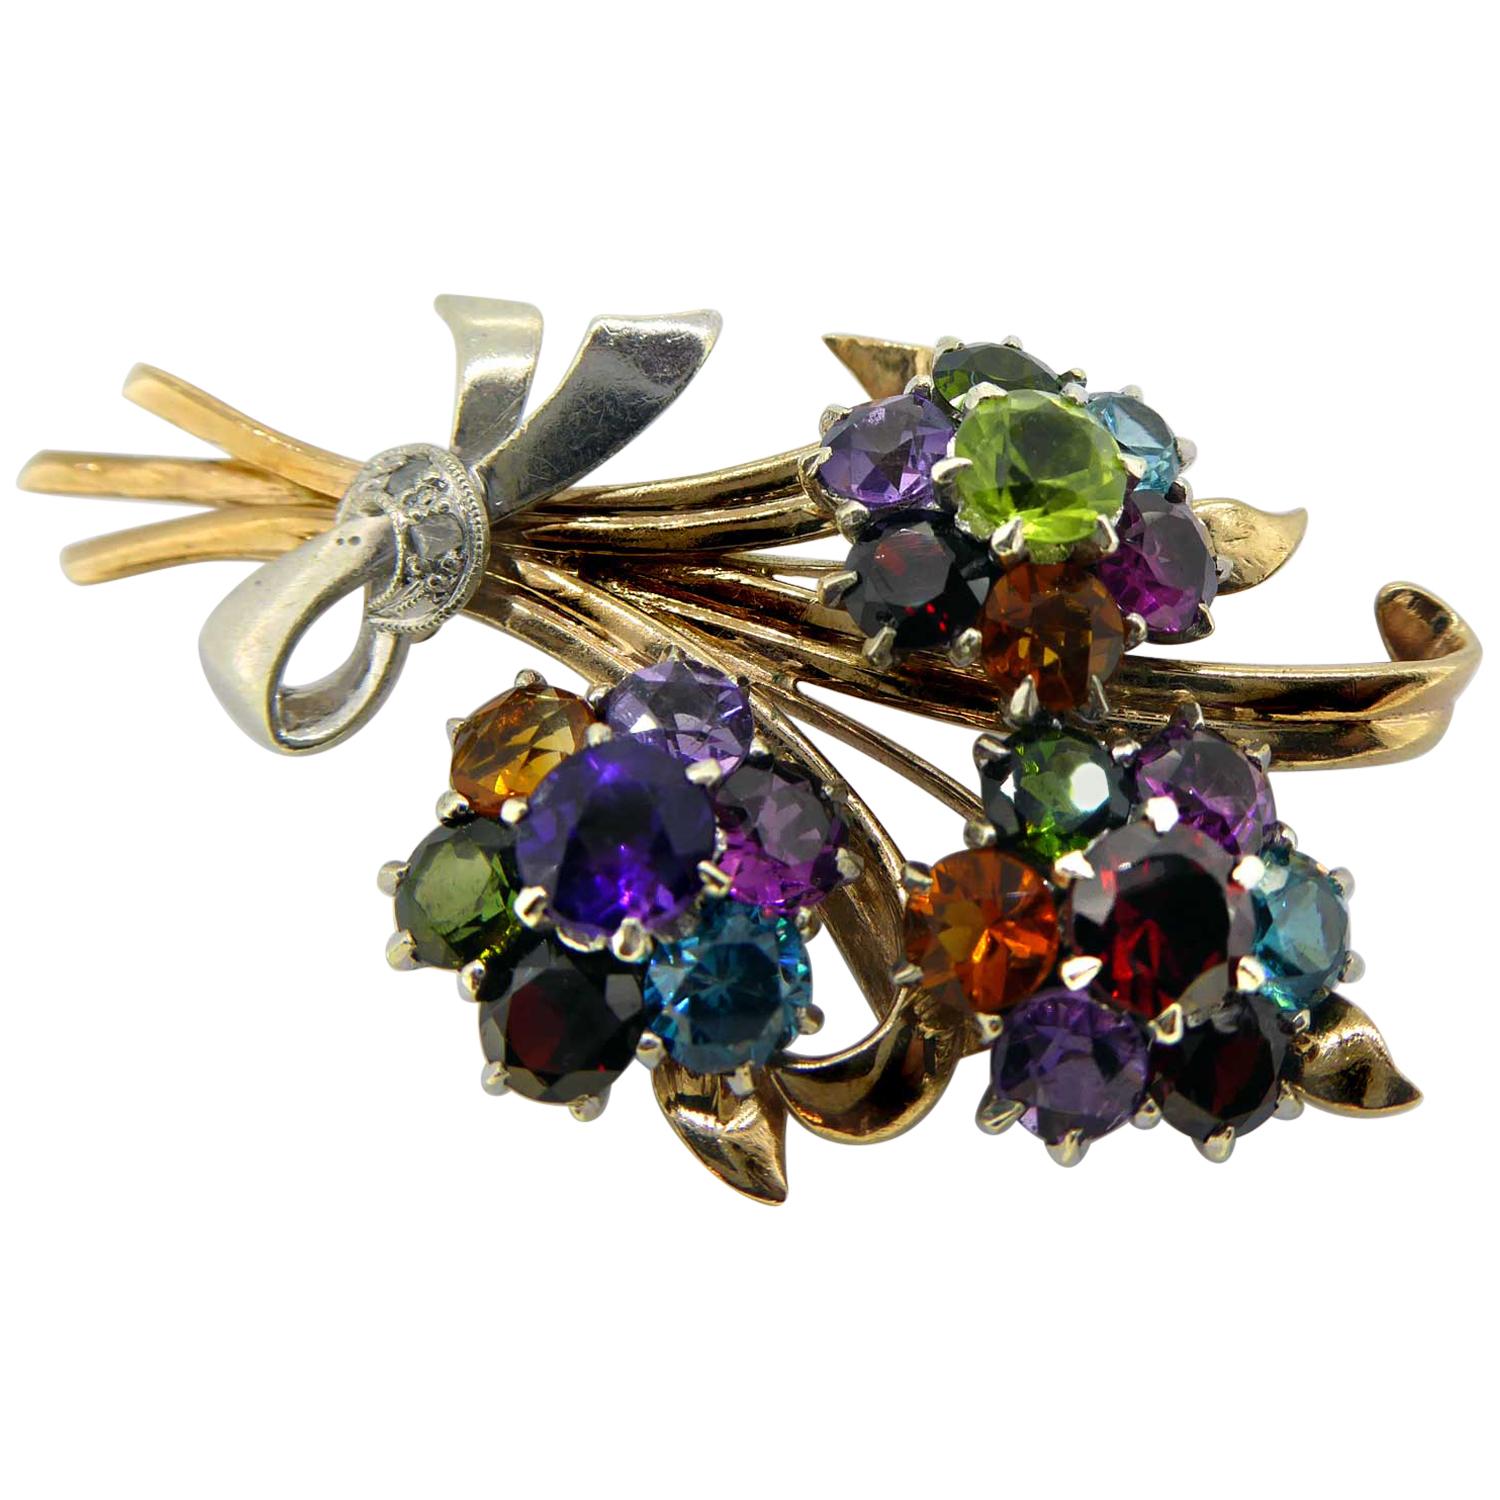 Vintage Flower Bouquet Brooch in Yellow and White Gold, Semi-Precious Gemstones